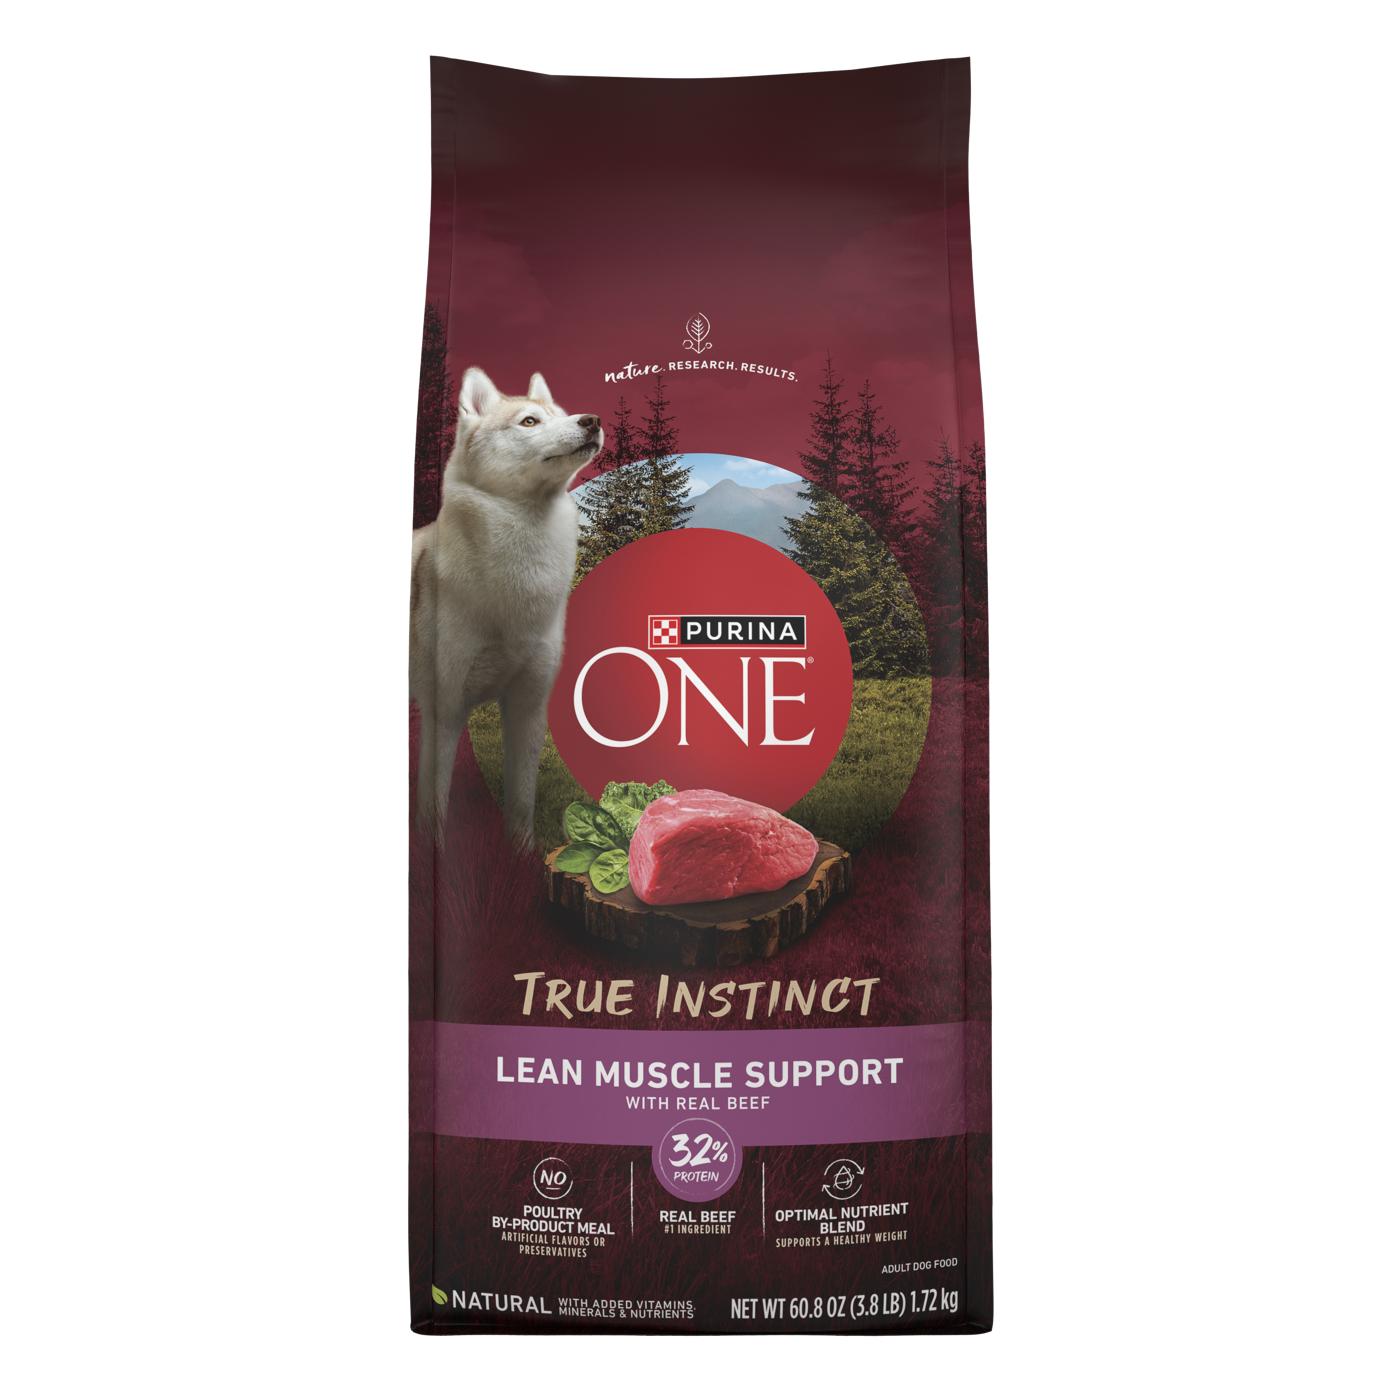 Purina One True Instinct Lean Muscle Support Beef Dry Dog Food; image 1 of 8